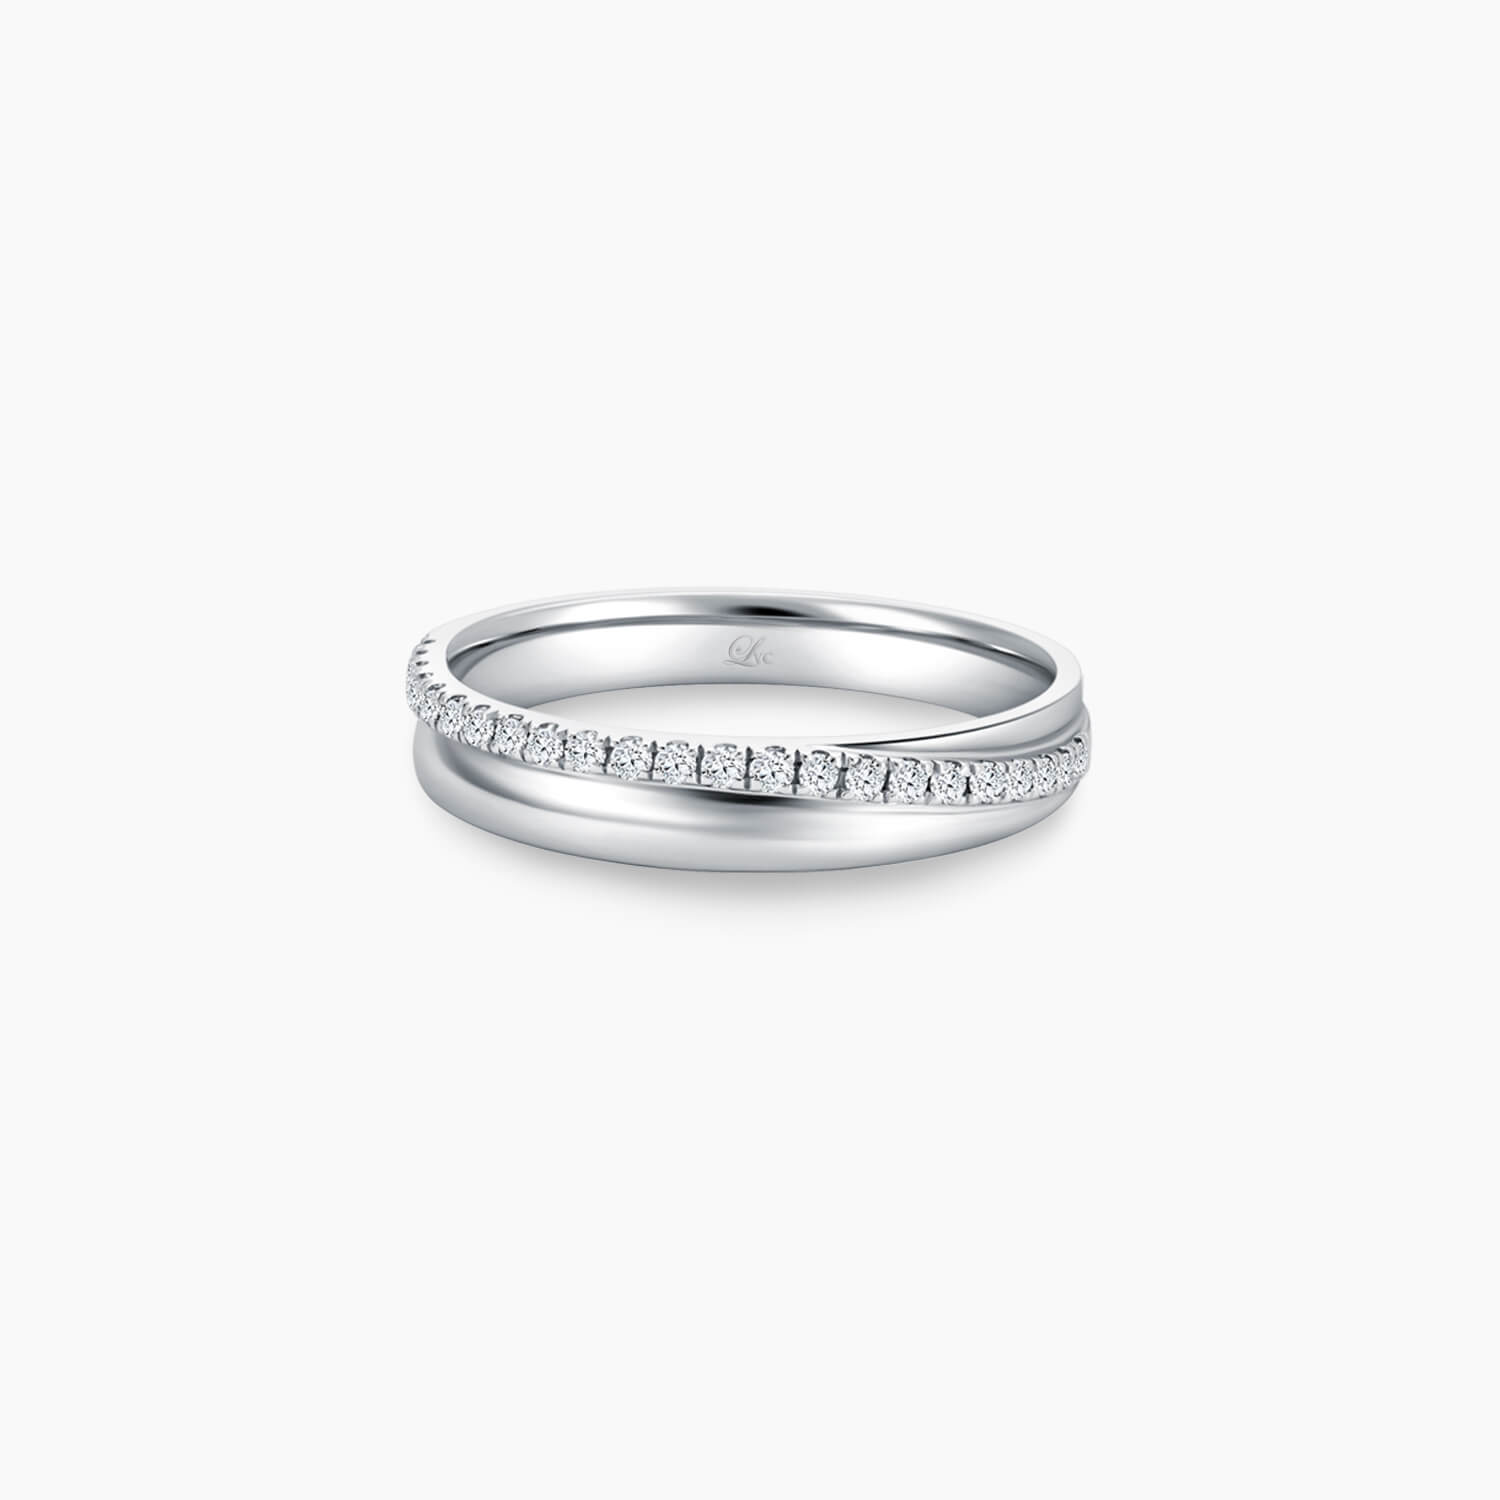 LVC PURETE ETERNITY WEDDING BAND IN PLATINUM WITH DIAMONDS a wedding band for women in platinum with 23 diamonds 钻石 戒指 cincin diamond